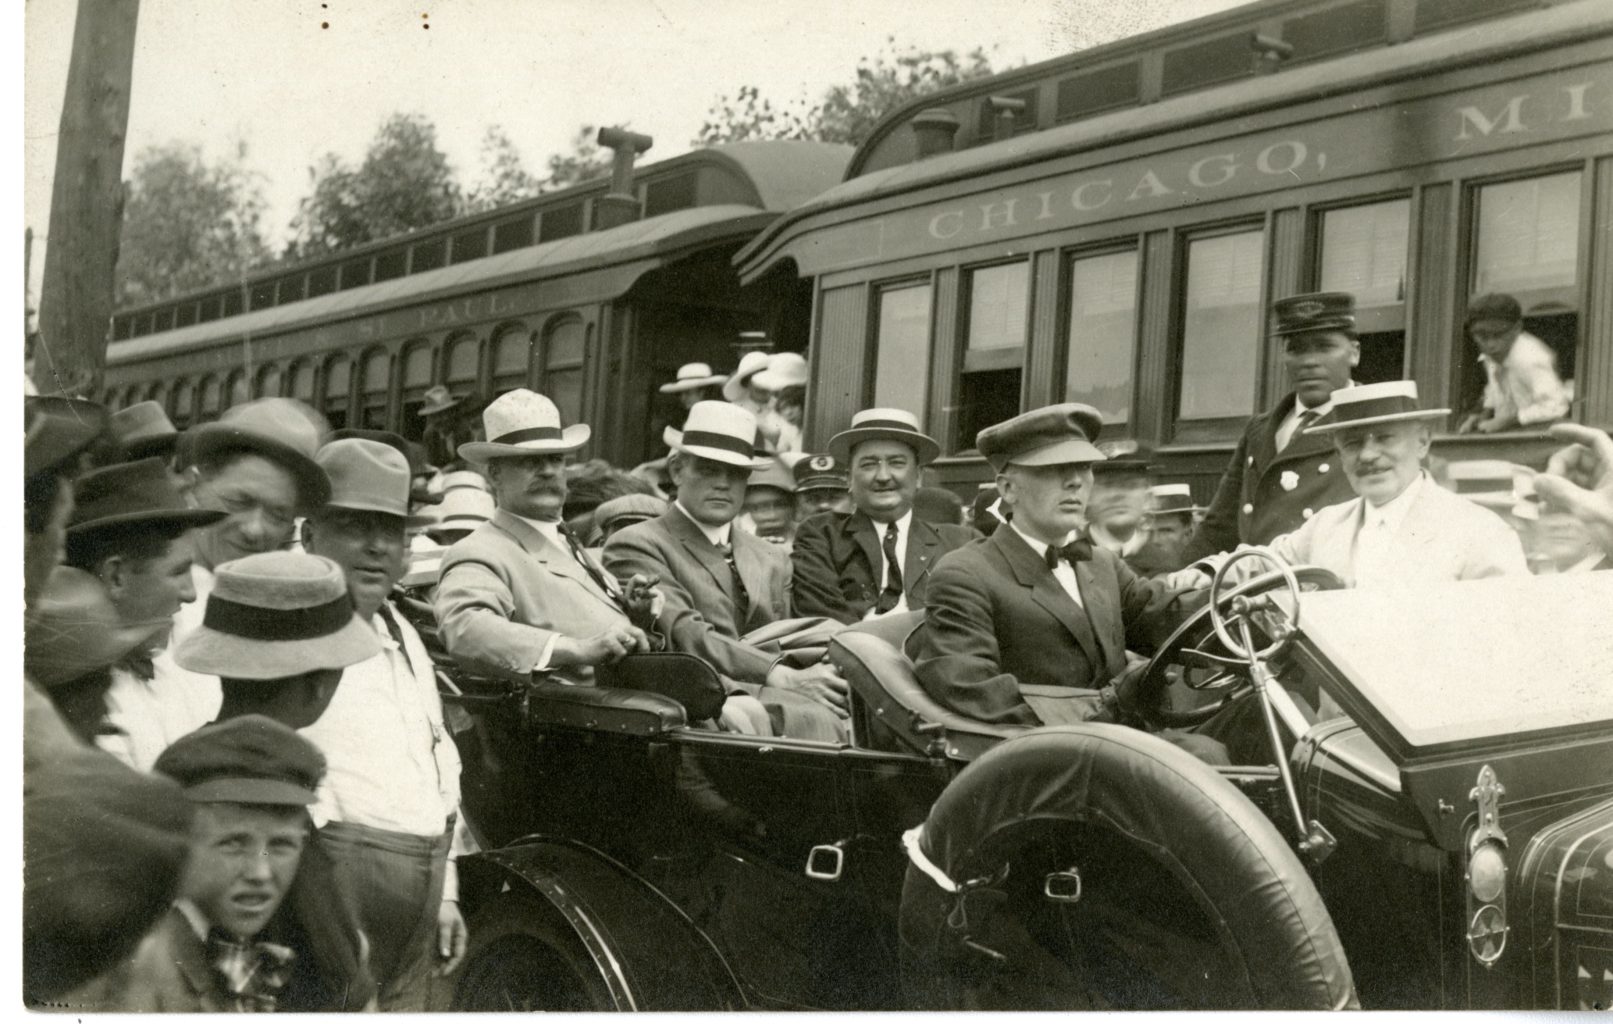 Large group of men, some in car, outside of train.